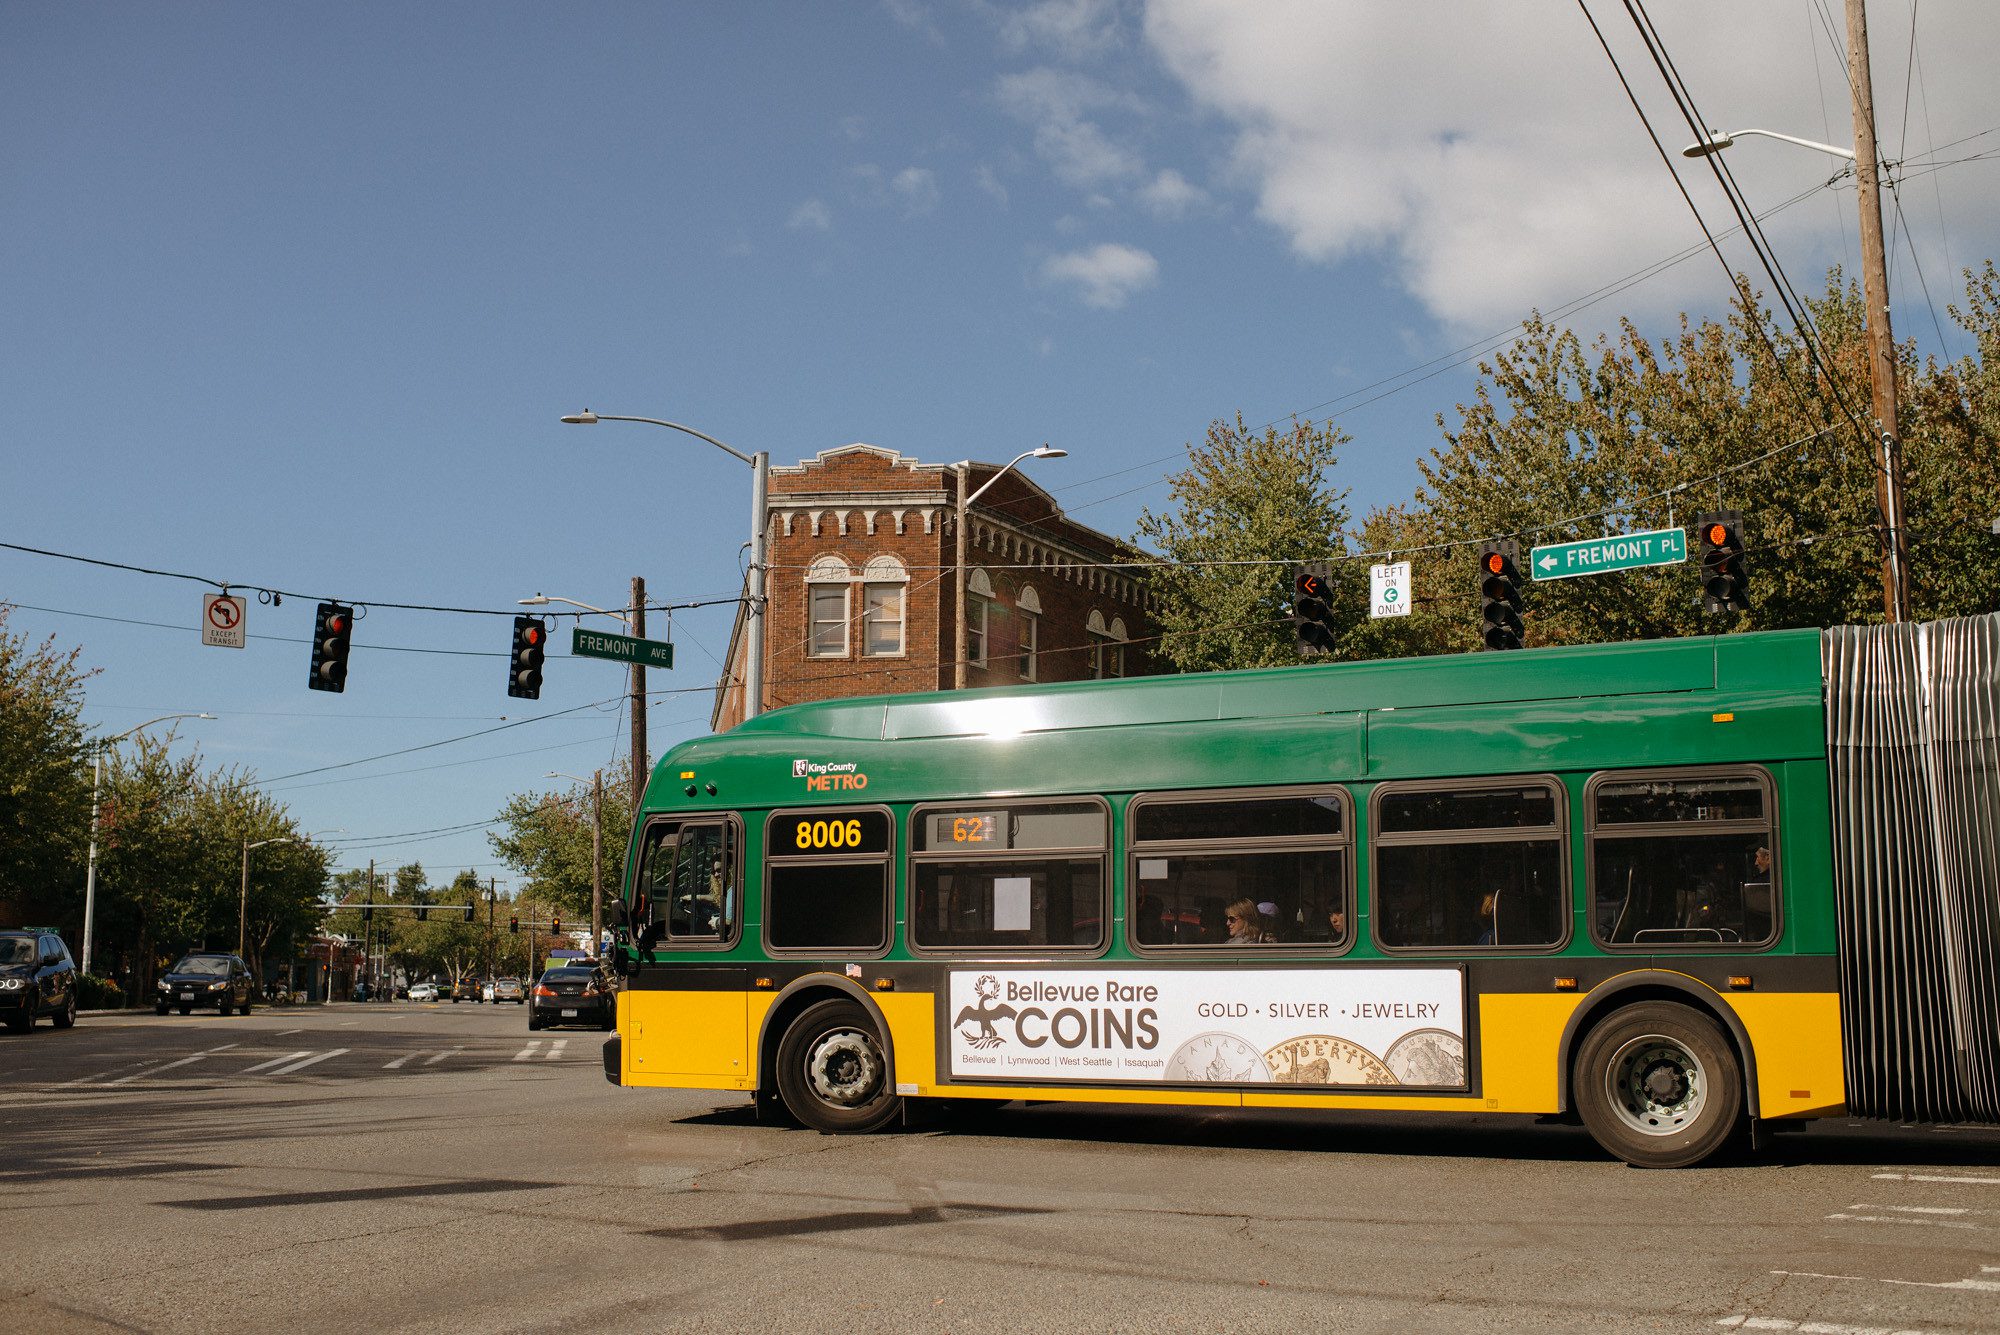 A King County Metro route 62 bus travels along Fremont Ave and Fremont Pl. Traffic signals, a large brick building, trees, and clouds, are visible in the background.